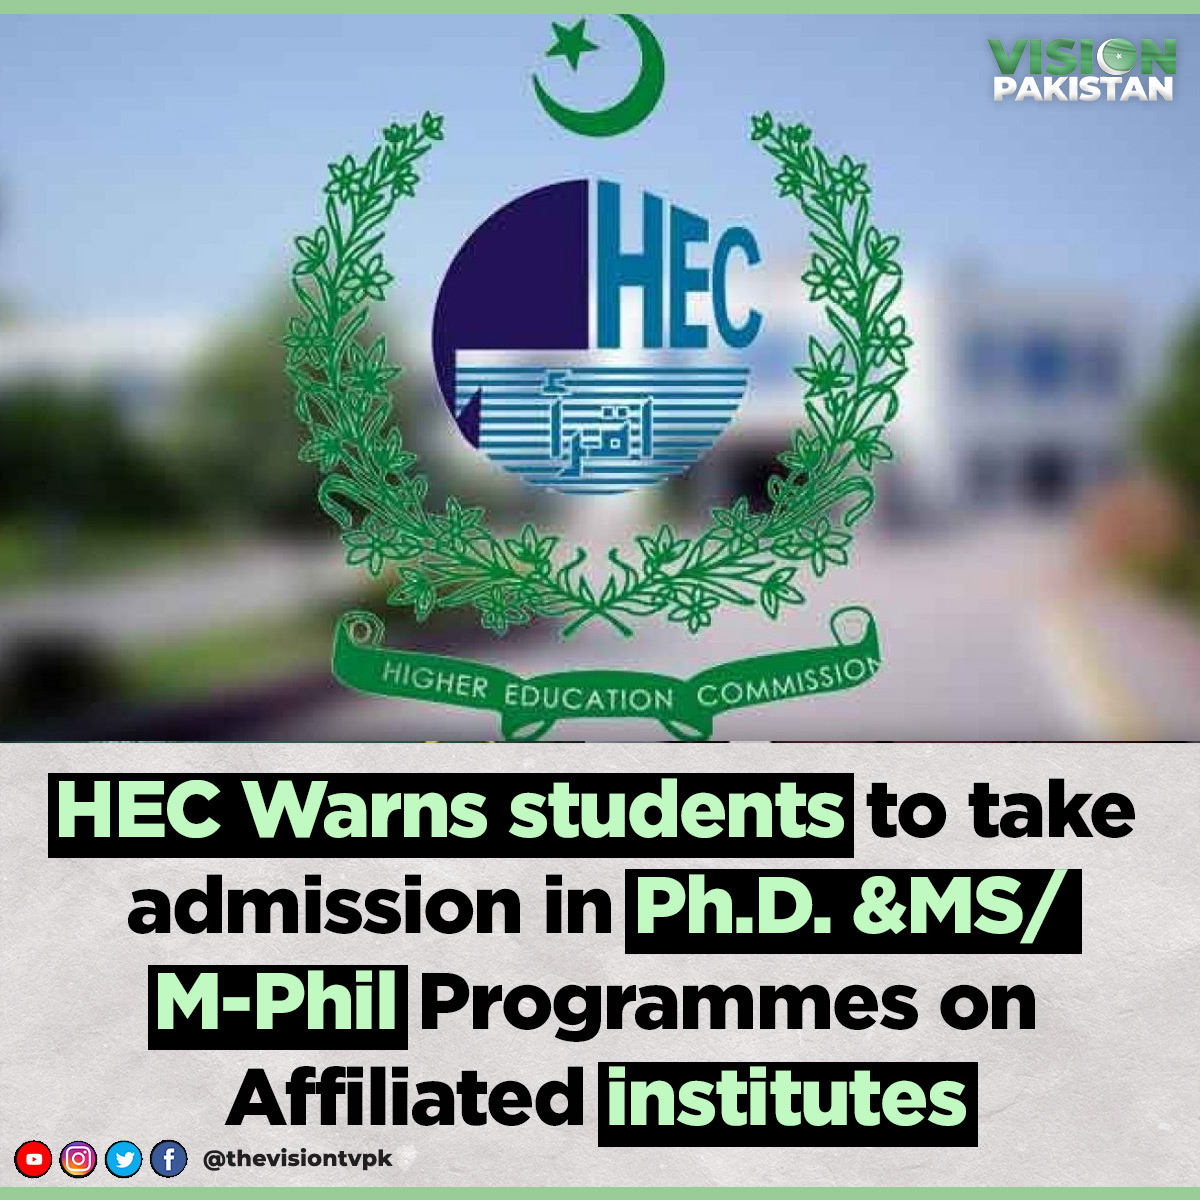 HEC Warns students to take admission in Ph.D. &MS/ M-Phil Programmes on Affiliated institutes 
#HEC #PhD  #MastersProgrammes #admissions